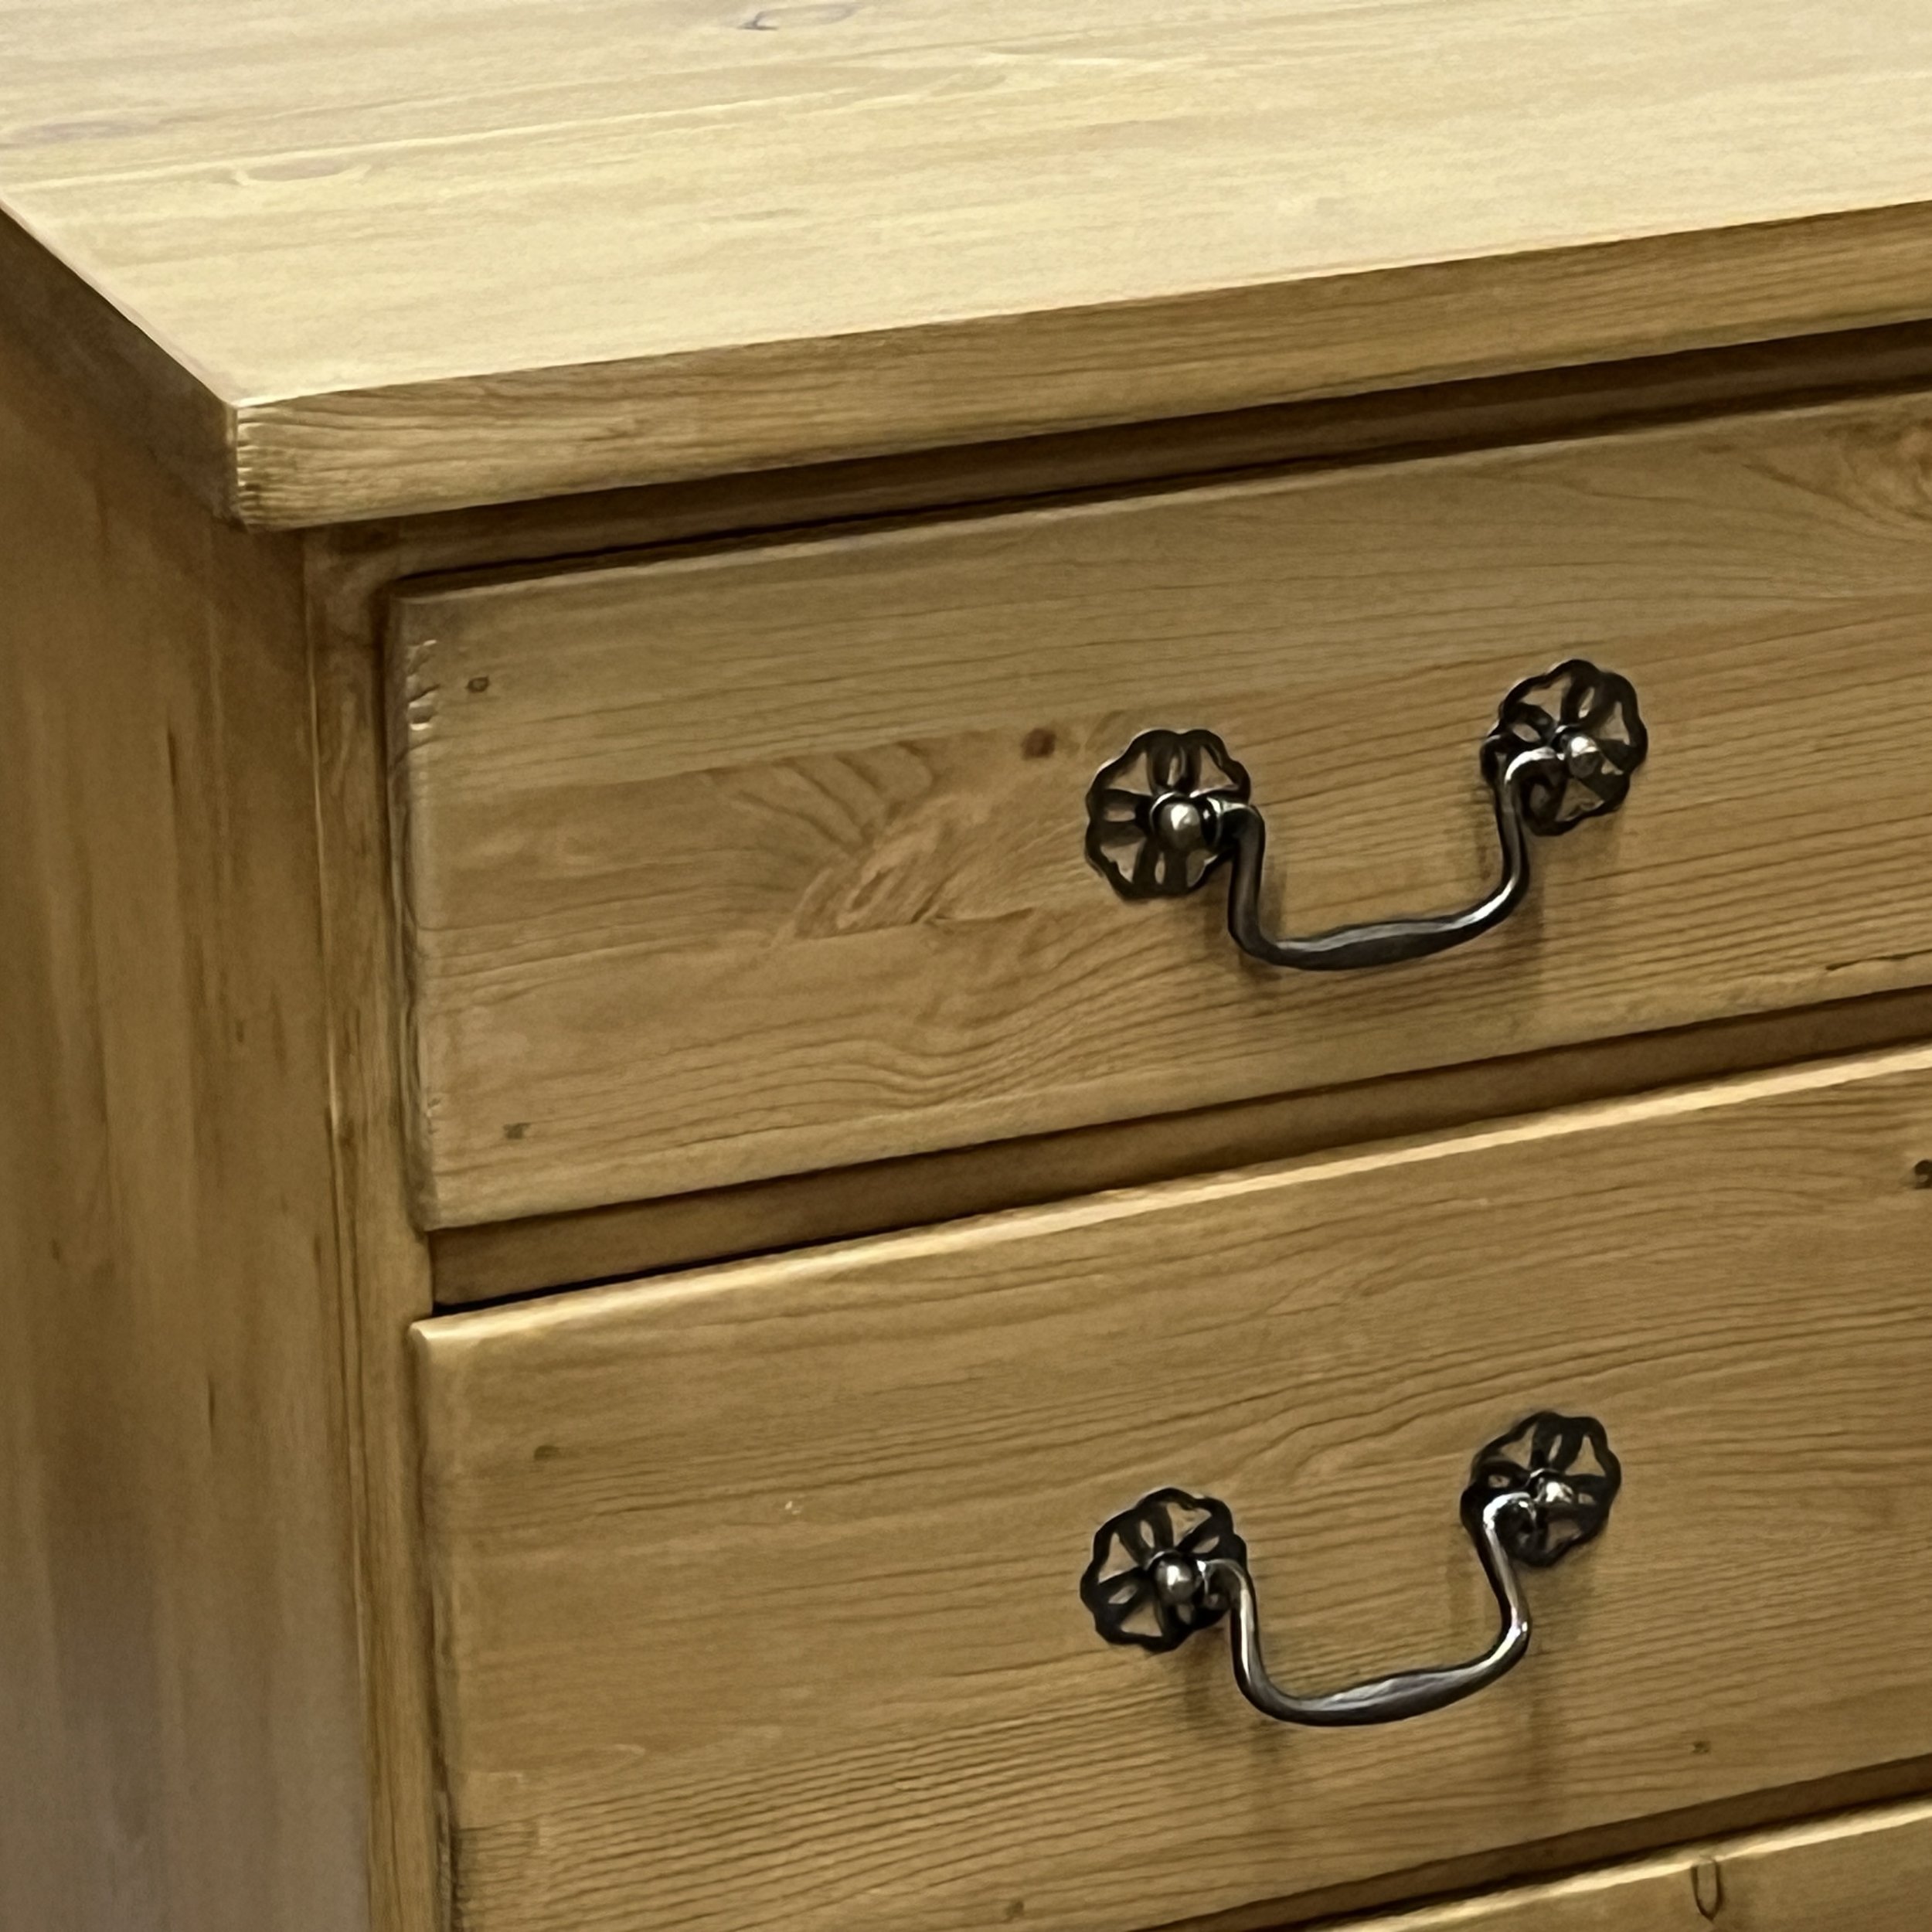 Pine drawers of a desk